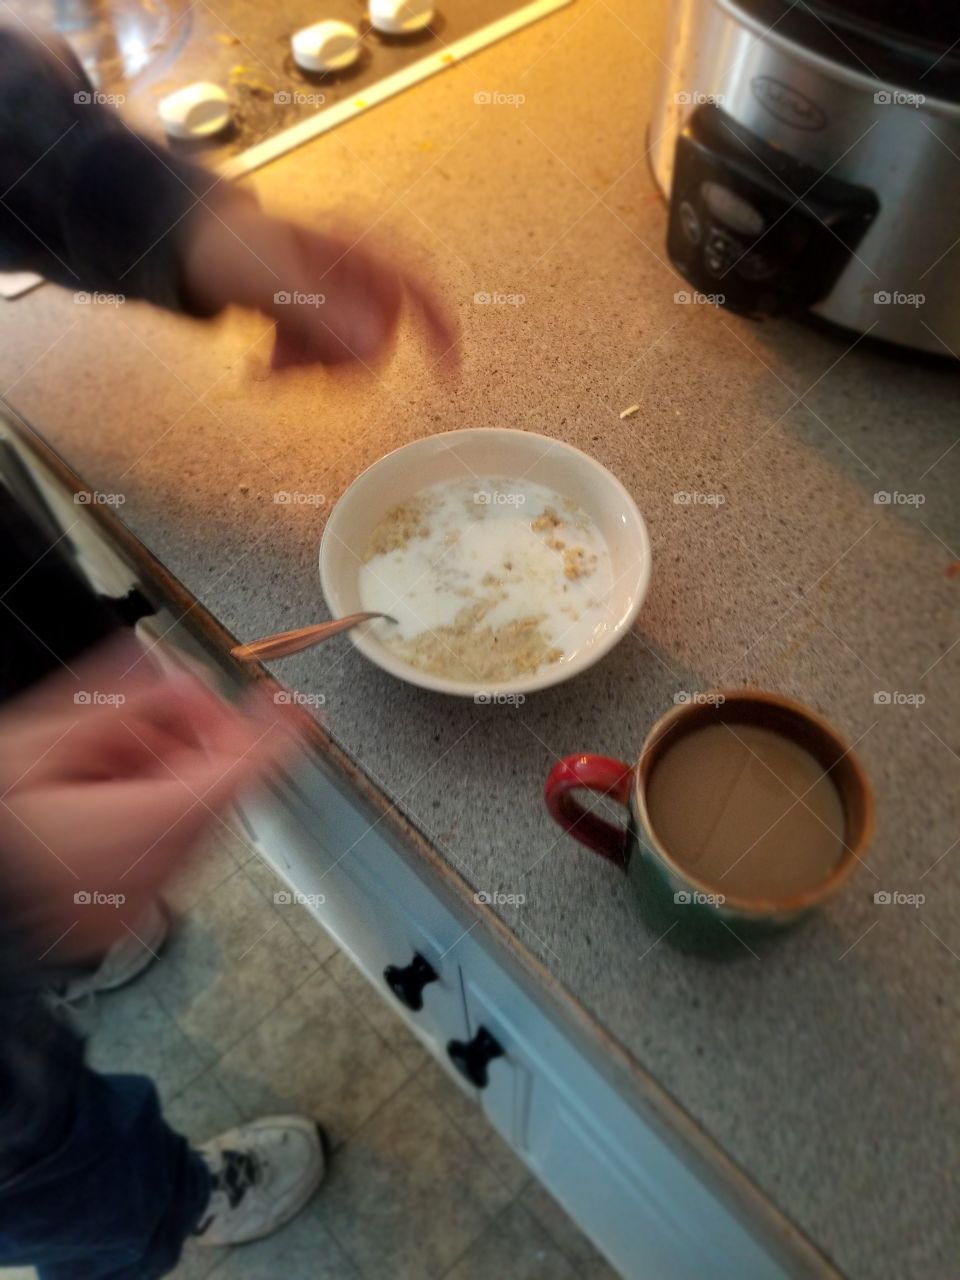 Preparing a bowl of oatmeal in the morning.